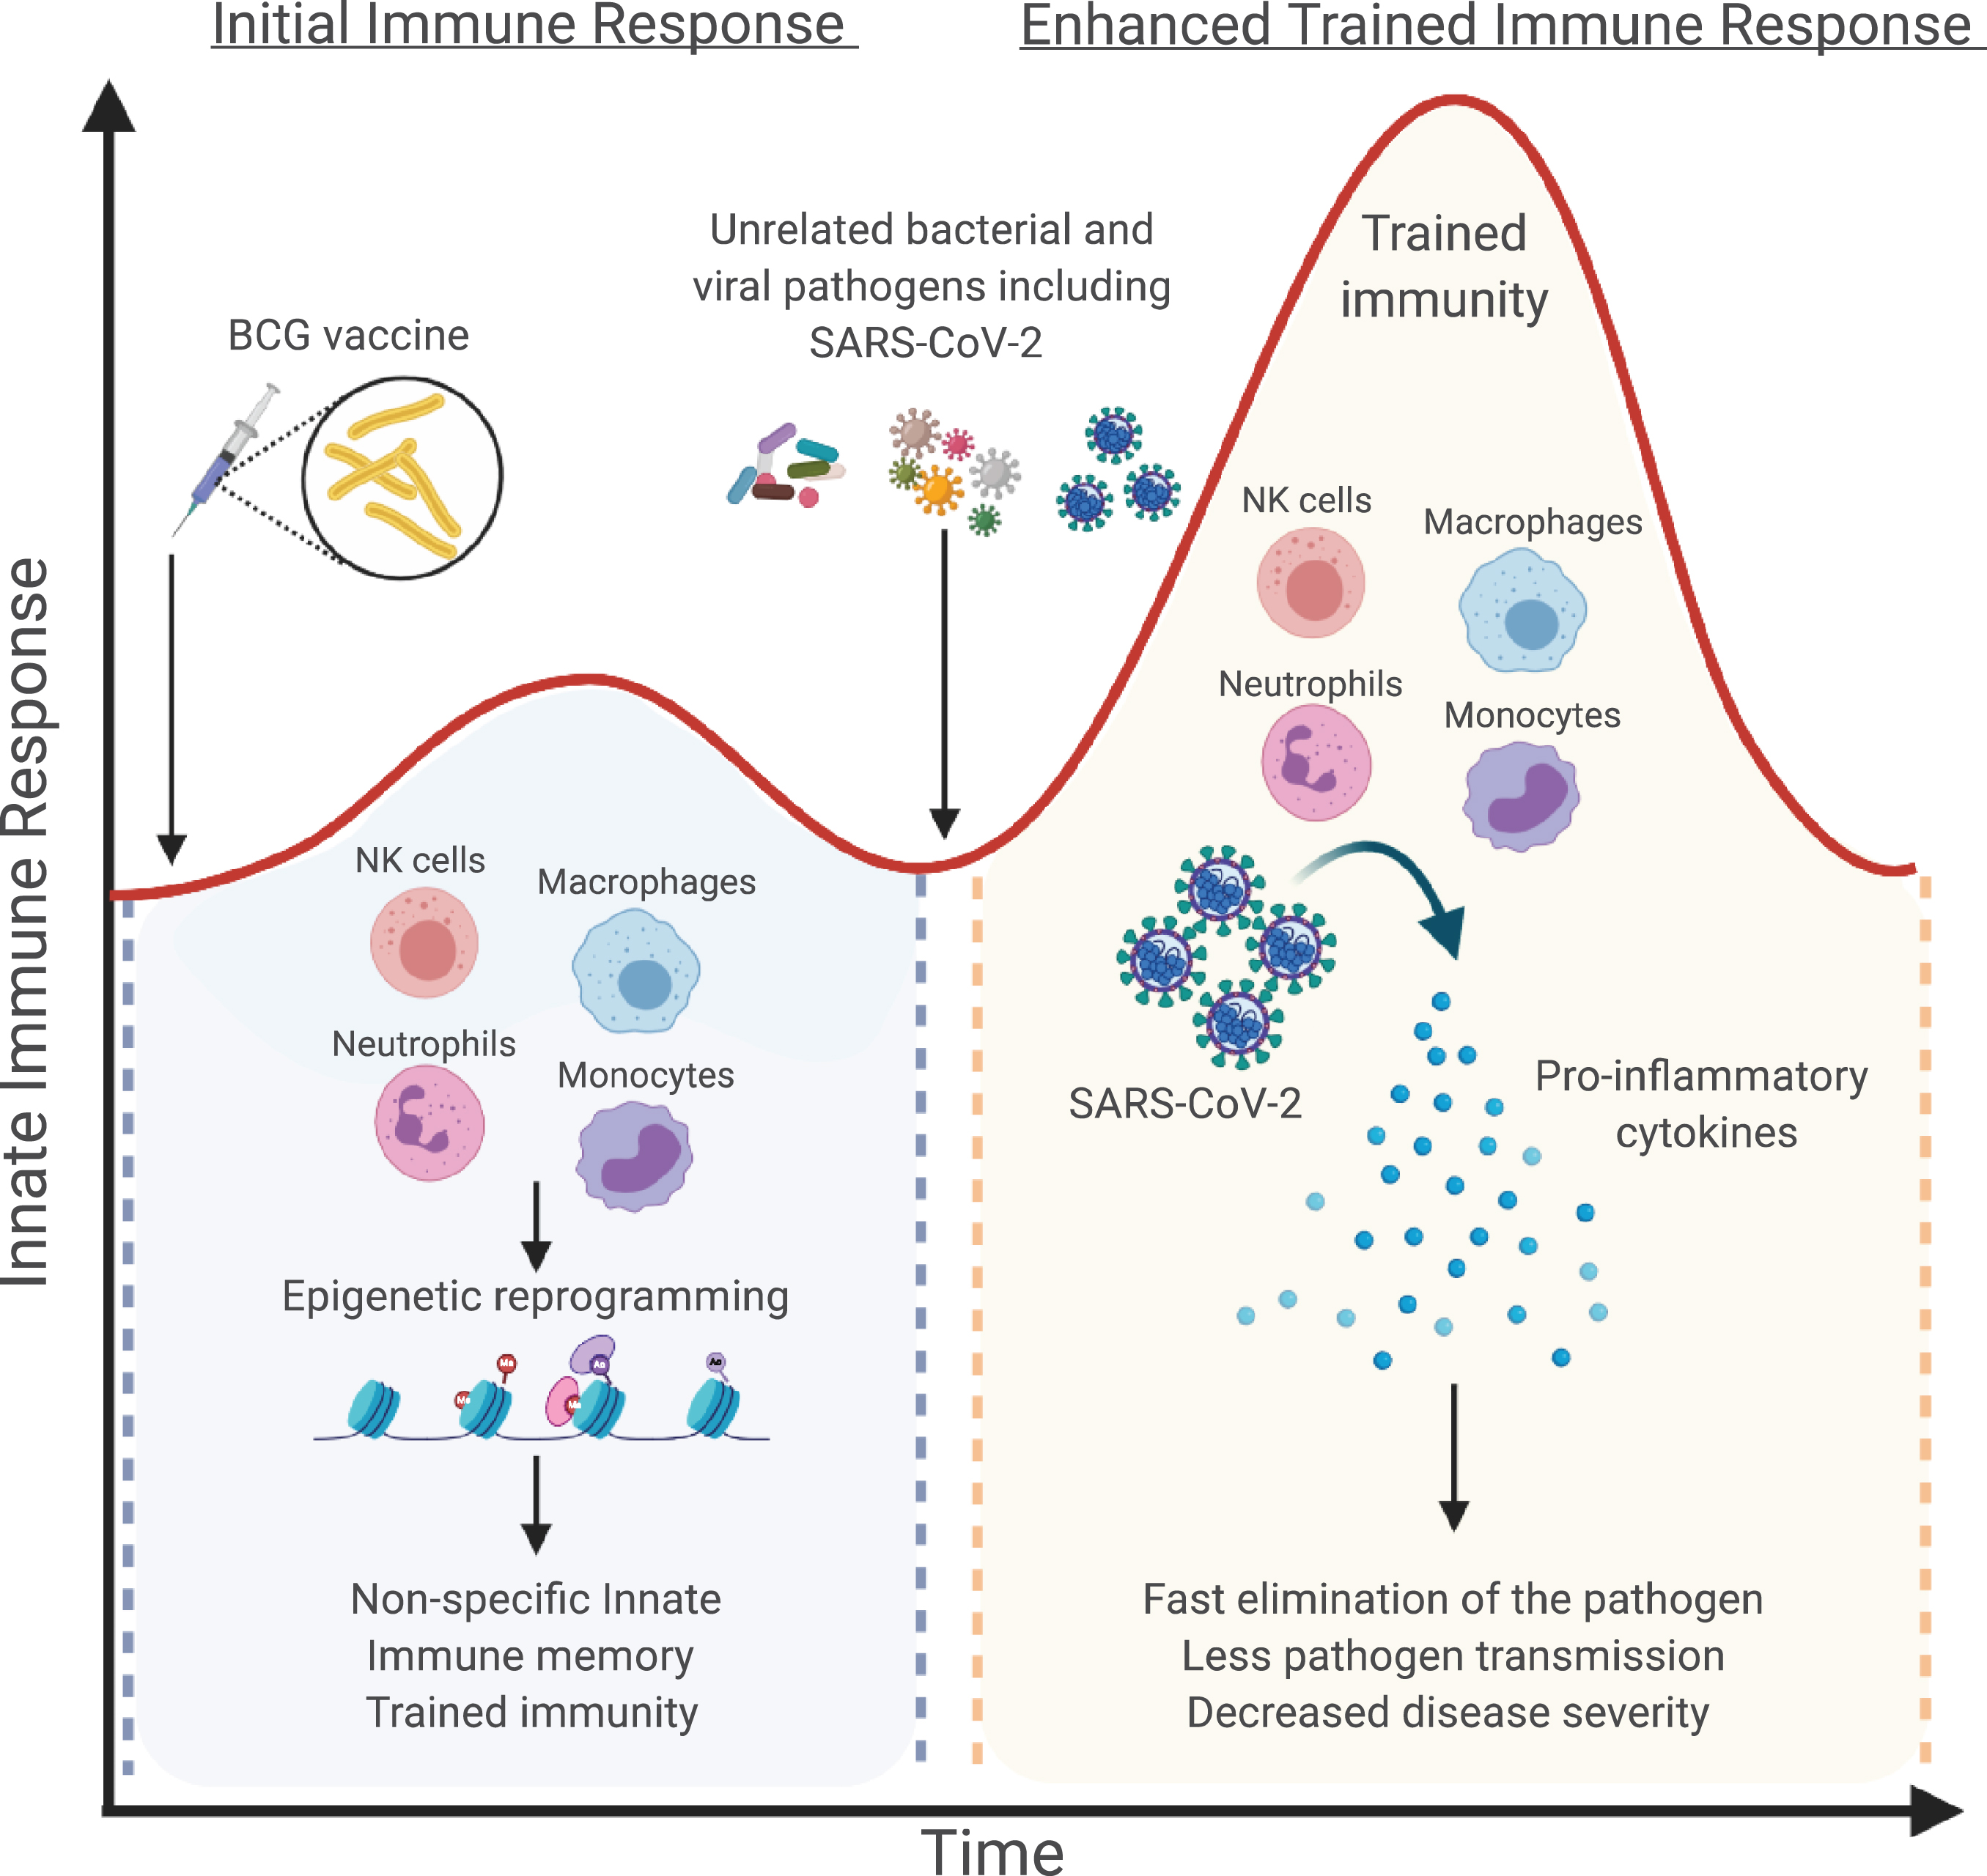 How BCG-induced trained immunity could prevent SARS-CoV-2 infections. Bacillus Calmette-Guérin (BCG) vaccination or other microbial components can induce a heterologous immunological memory, a process defined as “trained immunity”, which results in heightened innate immune responses upon exposure to secondary infections. BCG vaccination will initially stimulate innate immune cells, such as monocytes, macrophages, NK cells and neutrophils, and induce long-term metabolic and epigenetic reprograming resulting in increased responsiveness upon secondary stimulation with either the same or a different microbial ligand. In the context of COVID-19 pandemic, boosting innate immune cells by BCG vaccination and induction of trained immunity might provide nonspecific cross-protection against SARS-CoV-2 infection. Figure created with BioRender.com.
